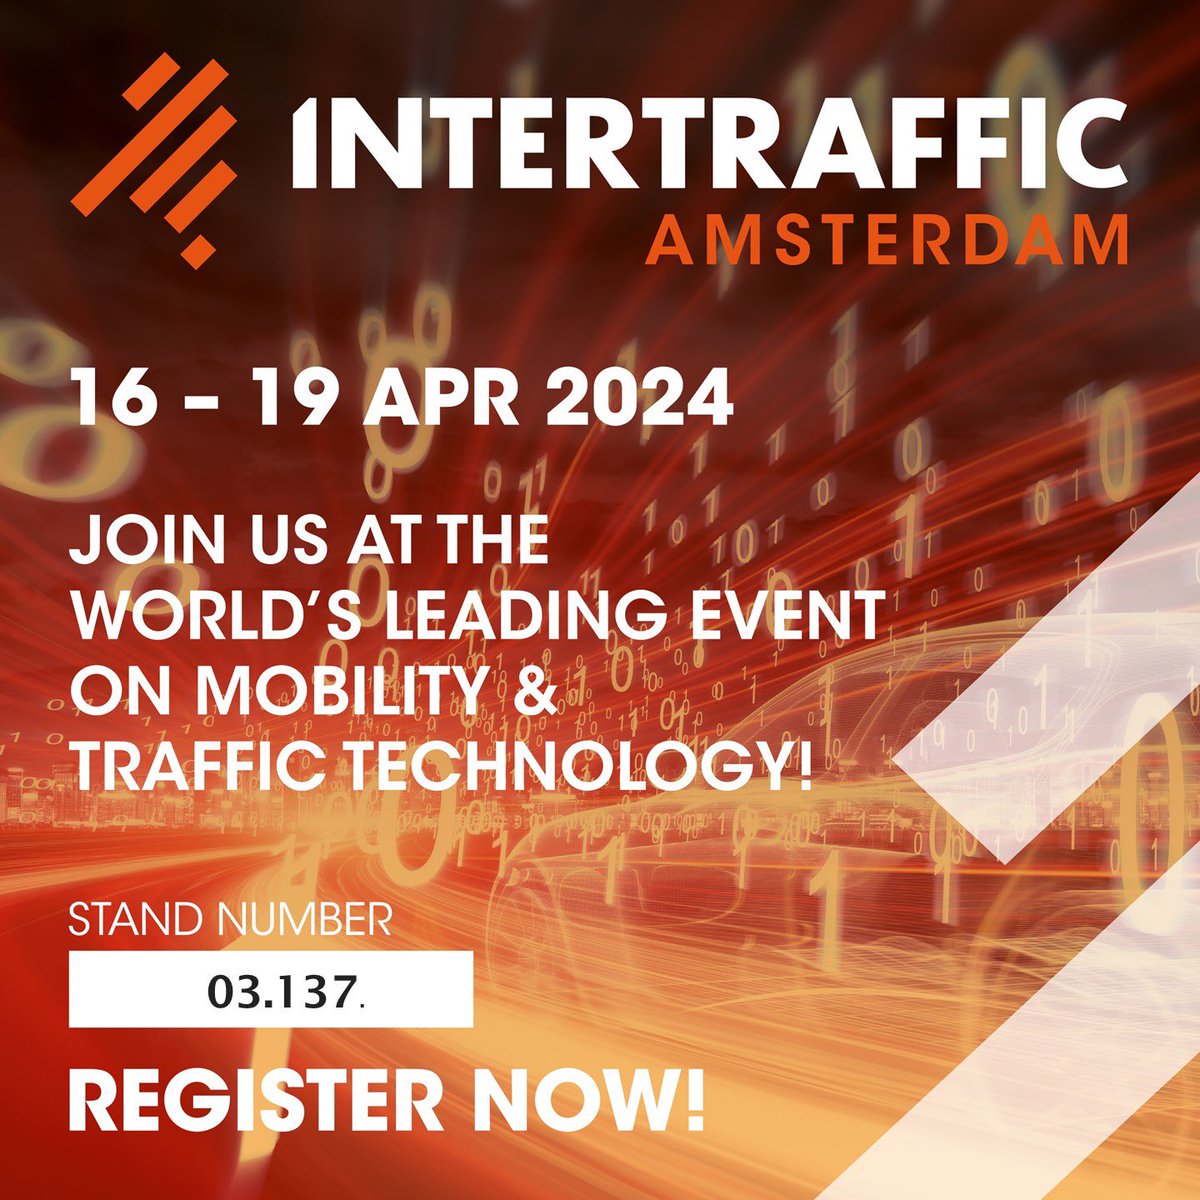 GSS Power will showcase our latest solutions at Intertraffic Amsterdam next month! 🚗🚦 Join us for cutting-edge technologies in smarter, sustainable transportation. Stay tuned for updates and exclusive previews! See you there! 🌍⚡️ #GSSPower #IntertrafficAmsterdam #SmartMobility